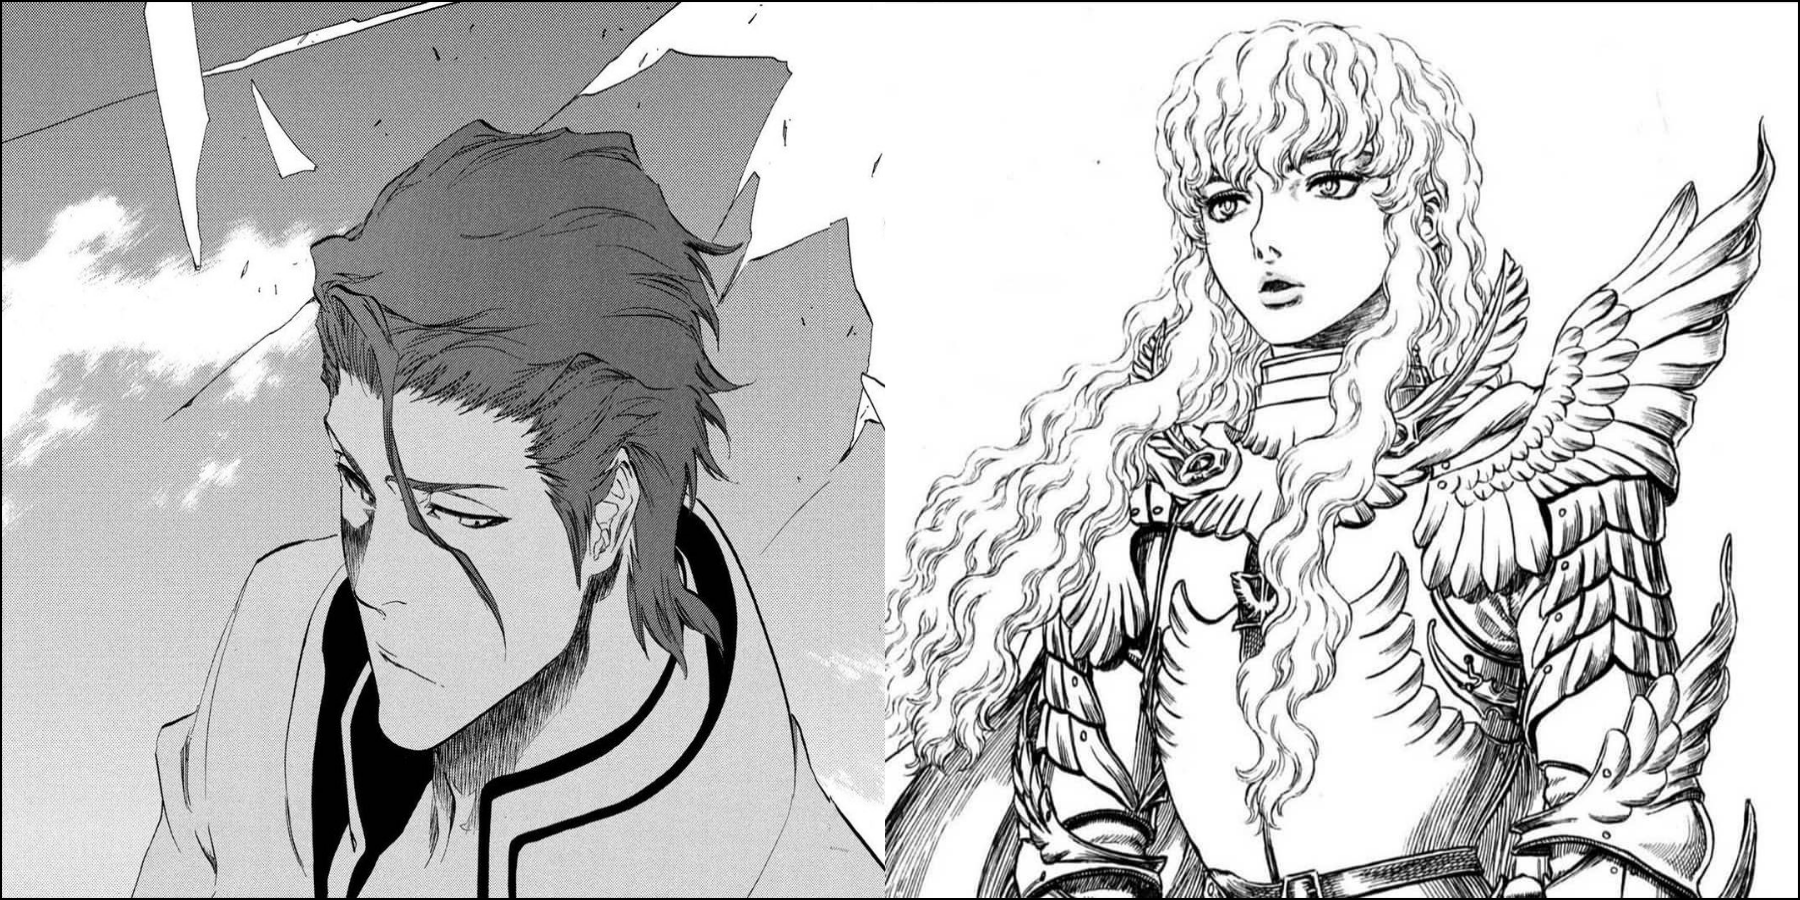 Aizen and Griffith